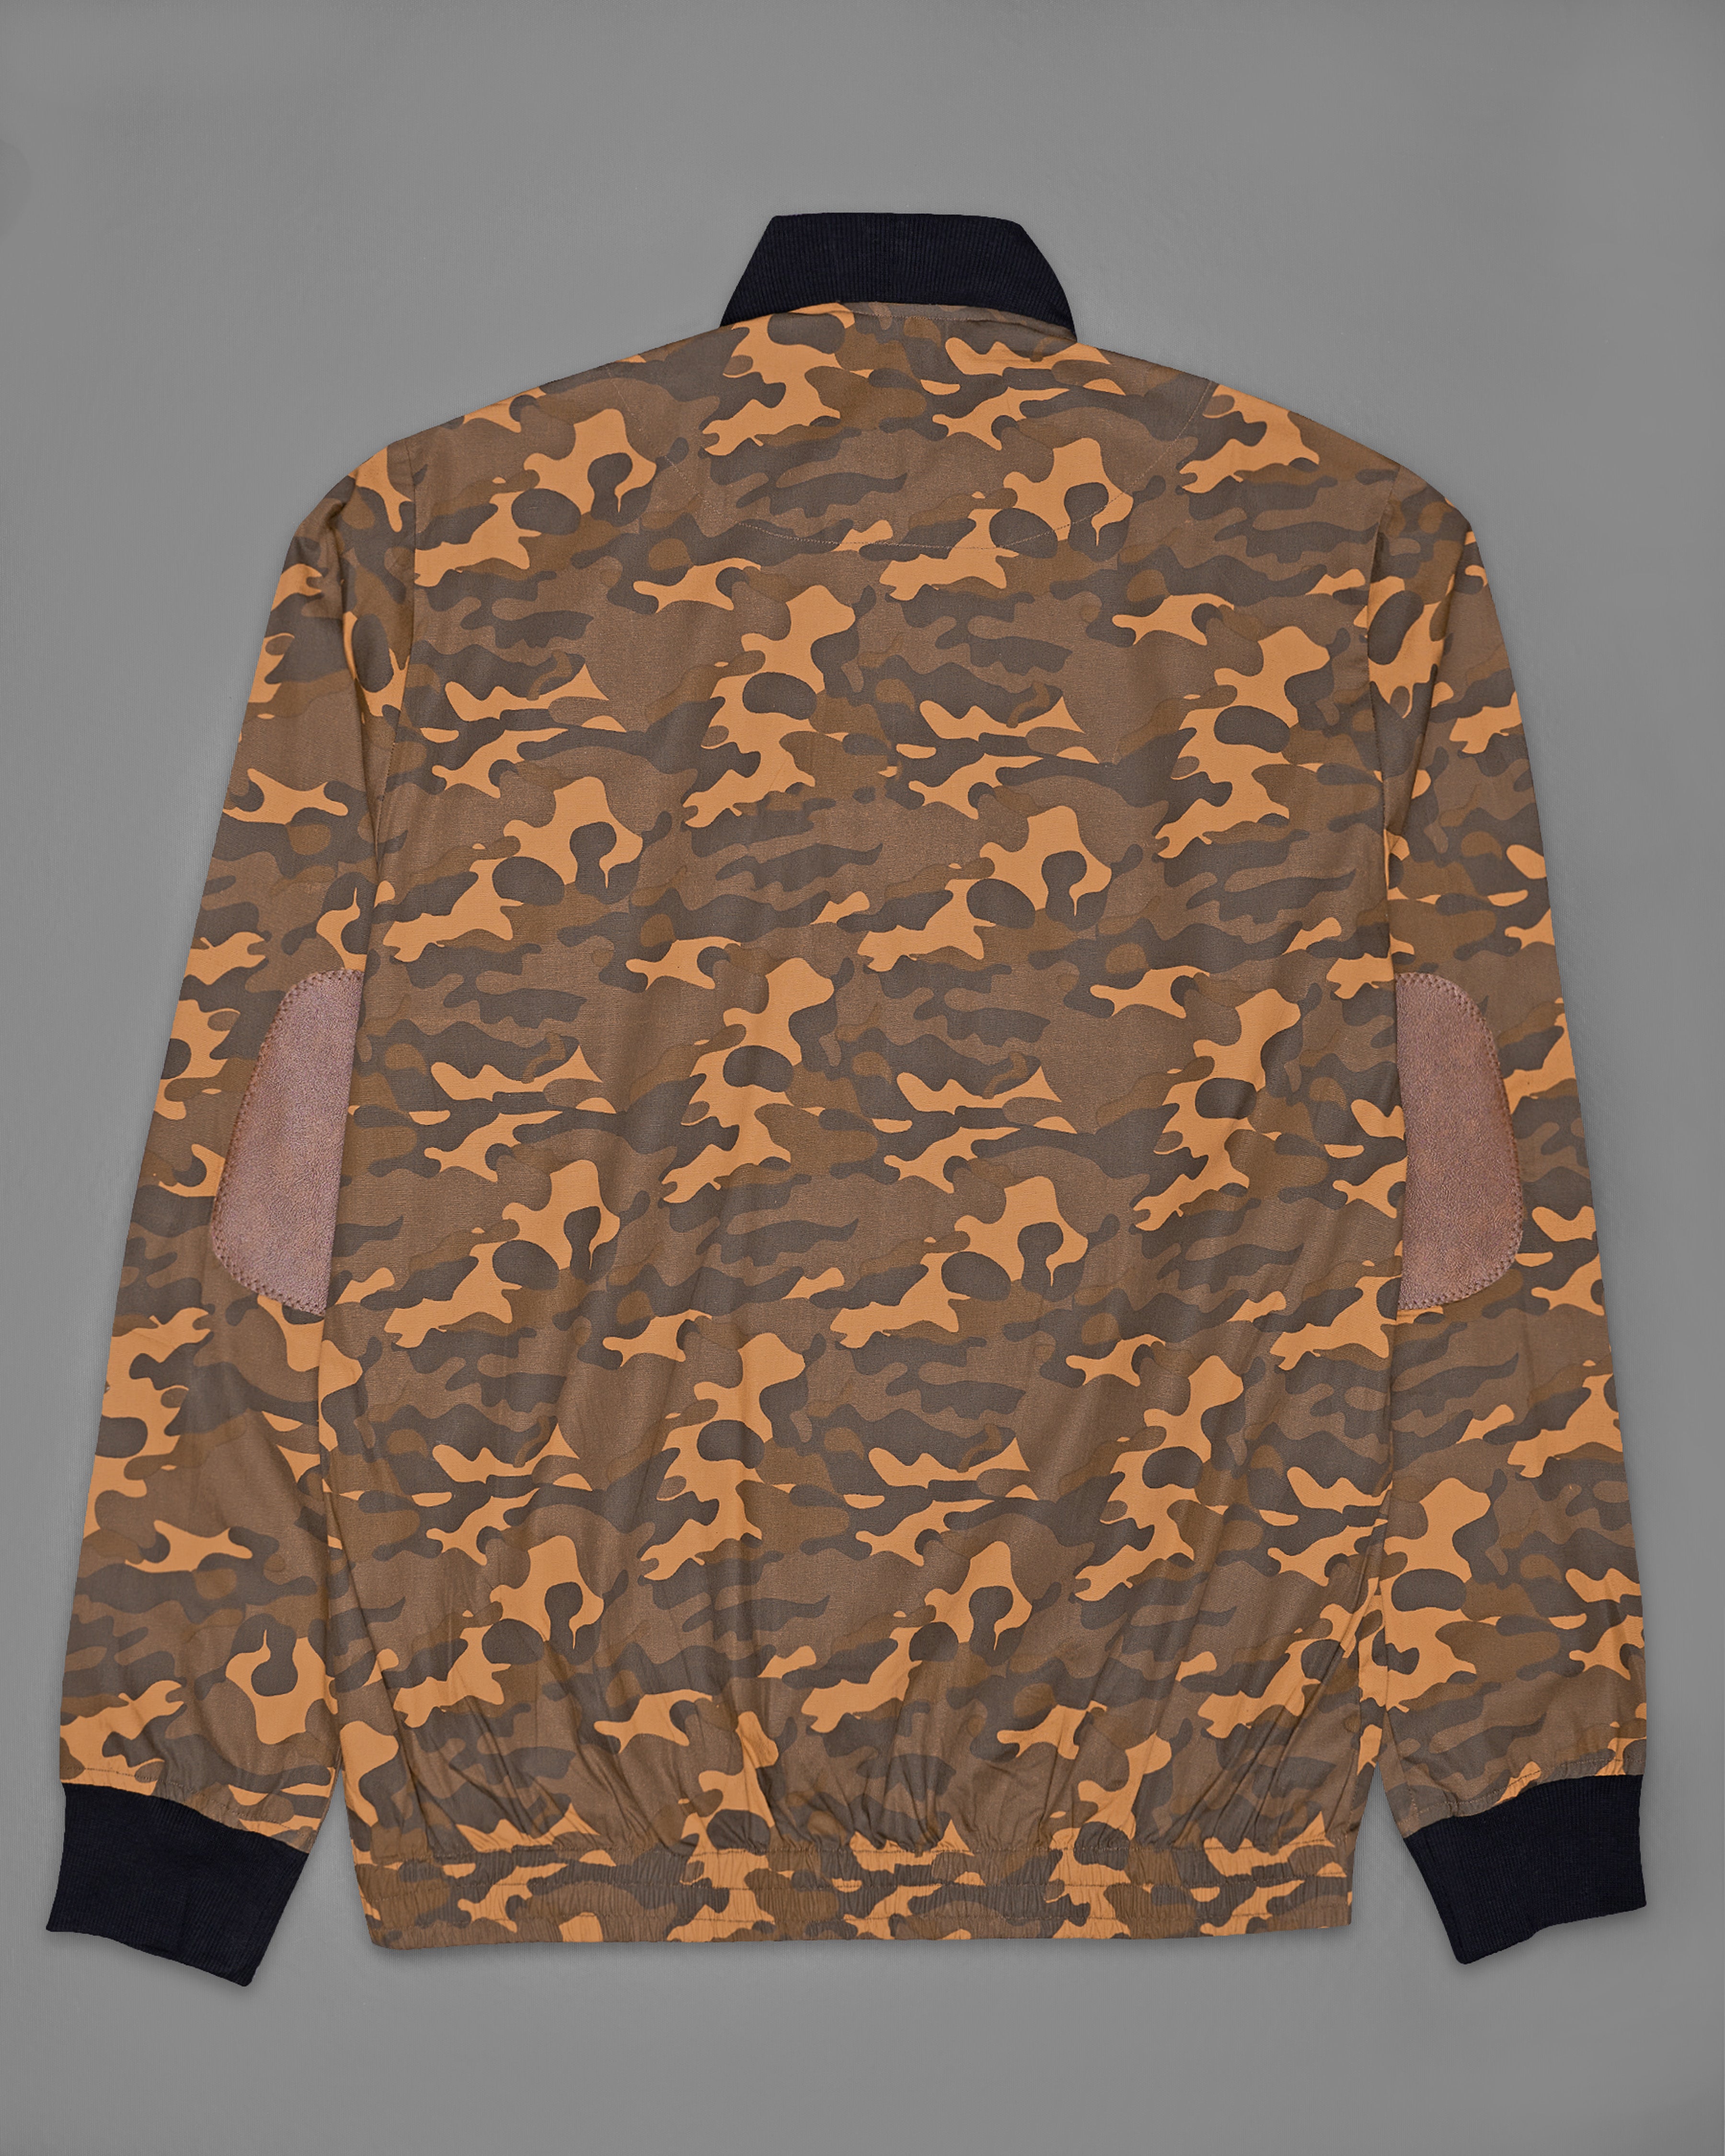 Bourbonn with Dark Taupe Brown Camouflage Royal Oxford Bomber Jacket